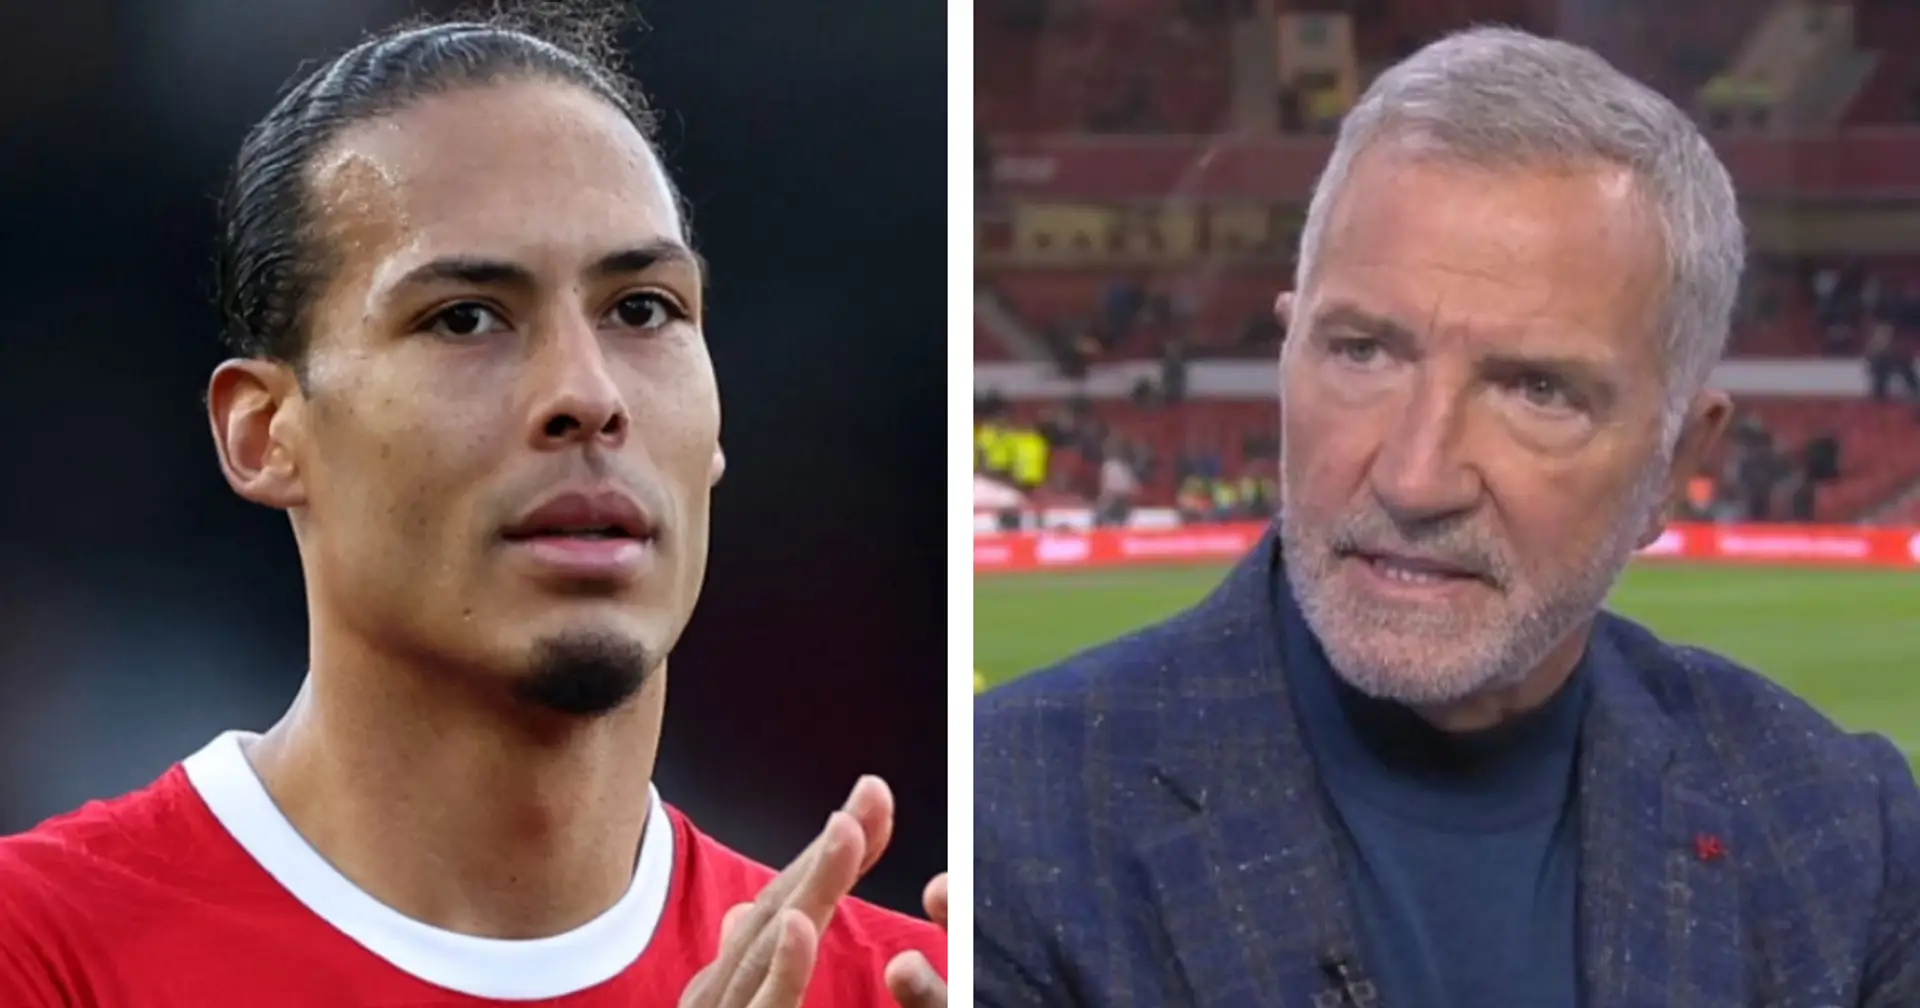 'He’s obviously unhappy': Graeme Souness tips Virgil van Dijk to leave Liverpool